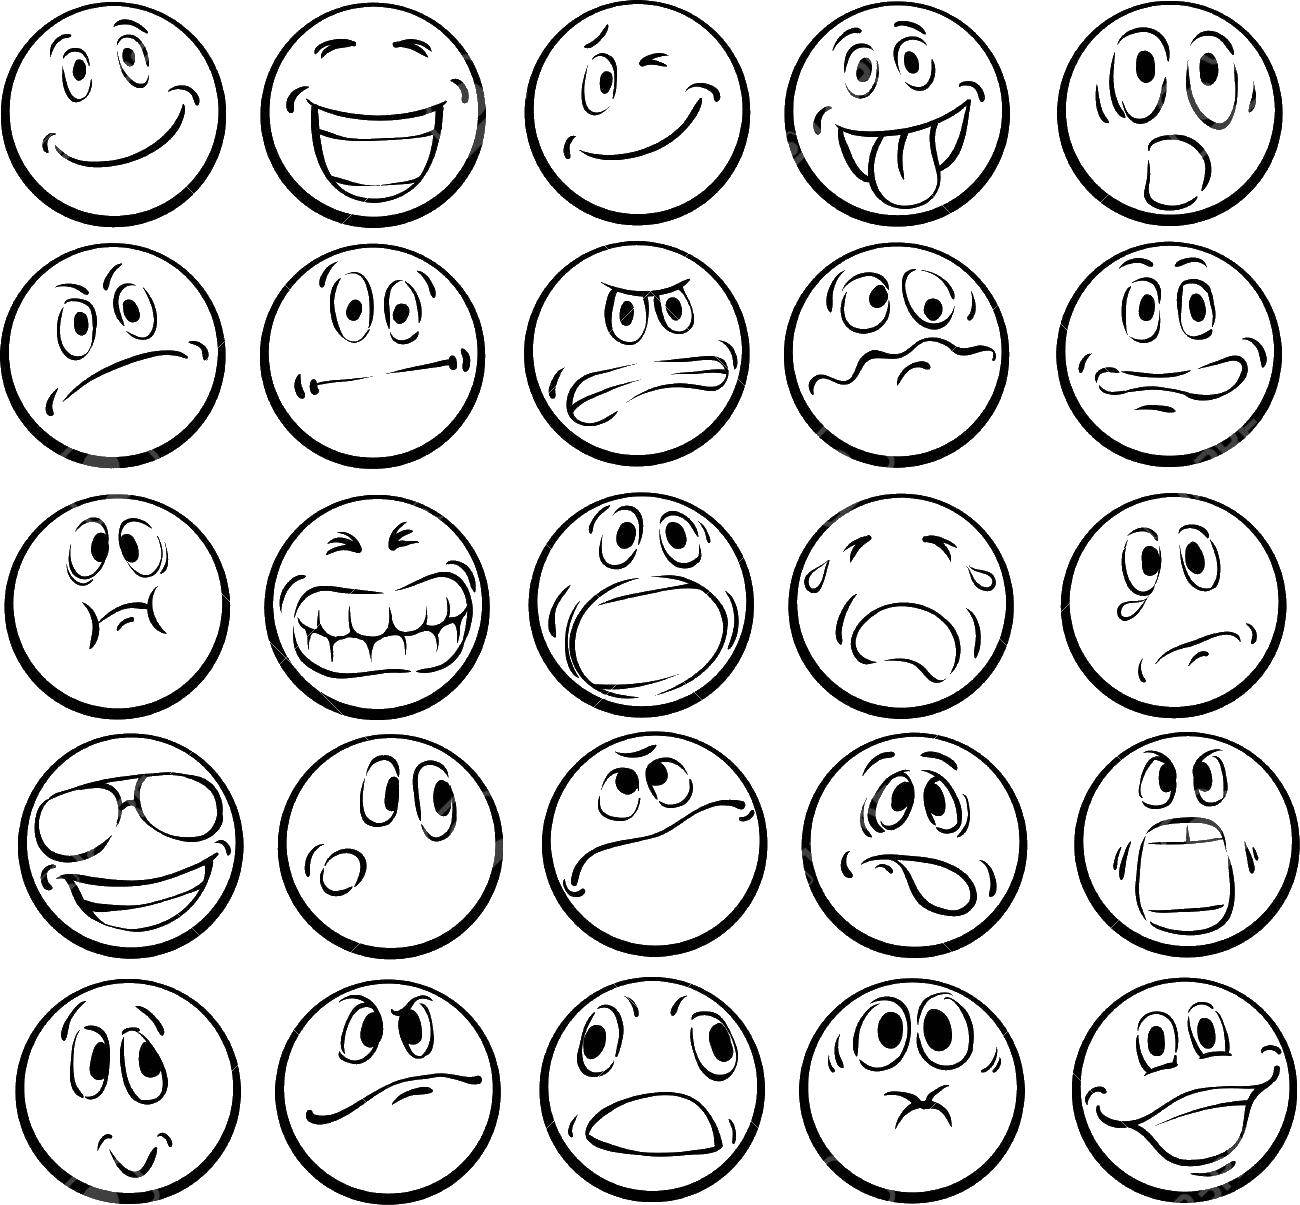 Coloring Emotions and smileys. Category emoticons. Tags:  silici, faces, emotions.